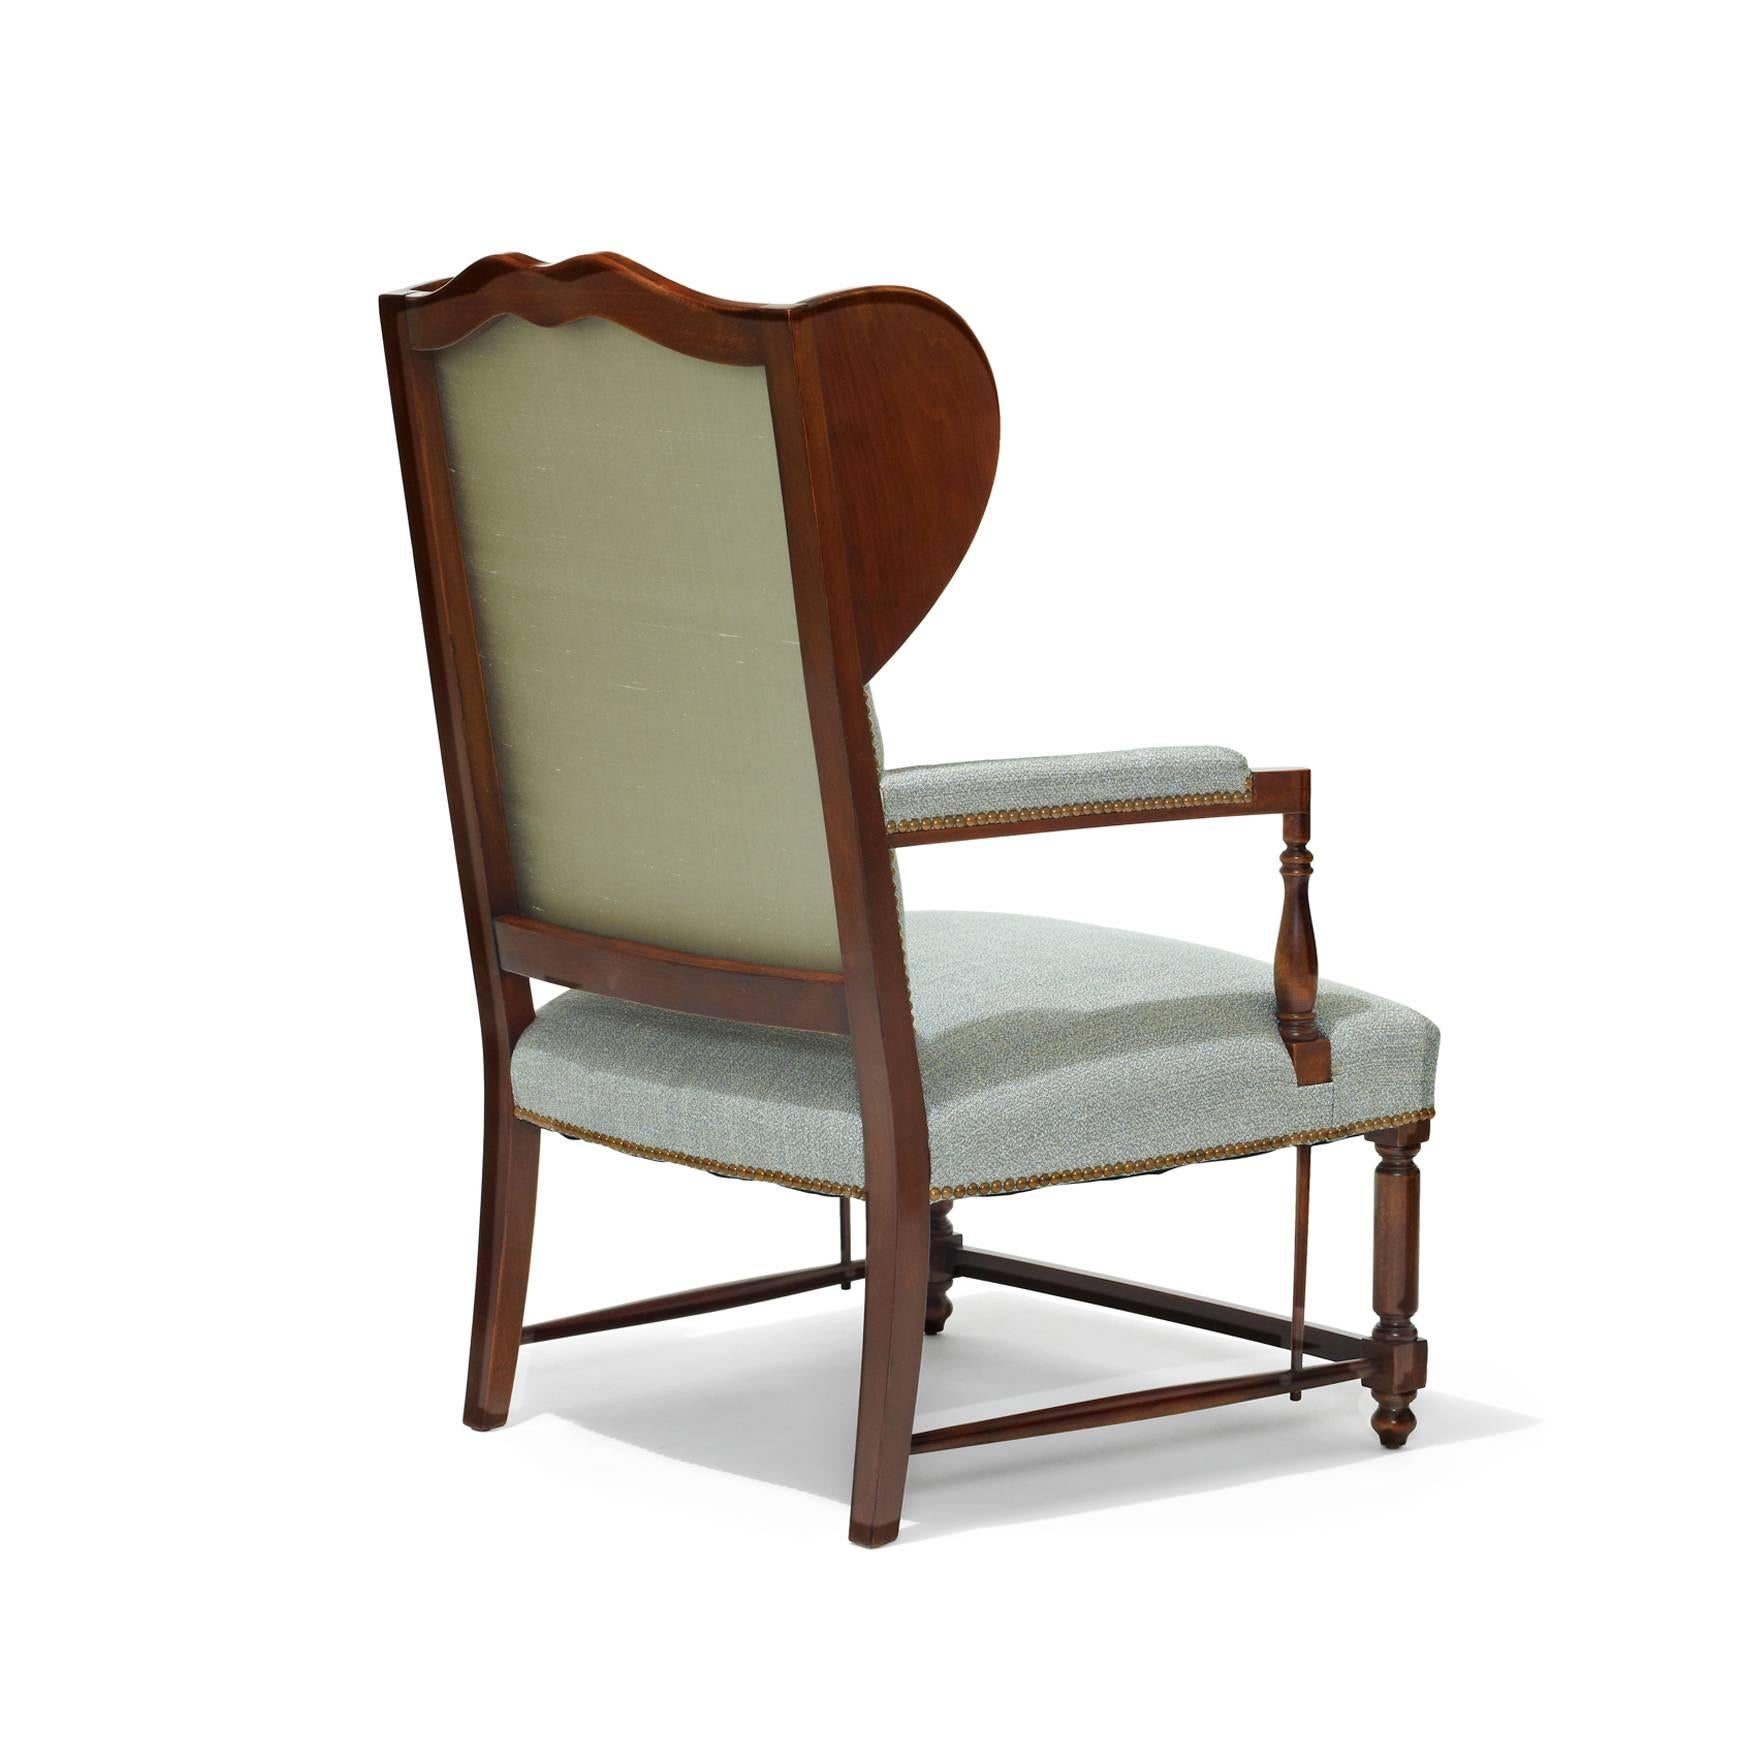 Swedish Art Deco Reinterpretations of Traditional Winged Back Chairs in Birch In Excellent Condition For Sale In New York, NY